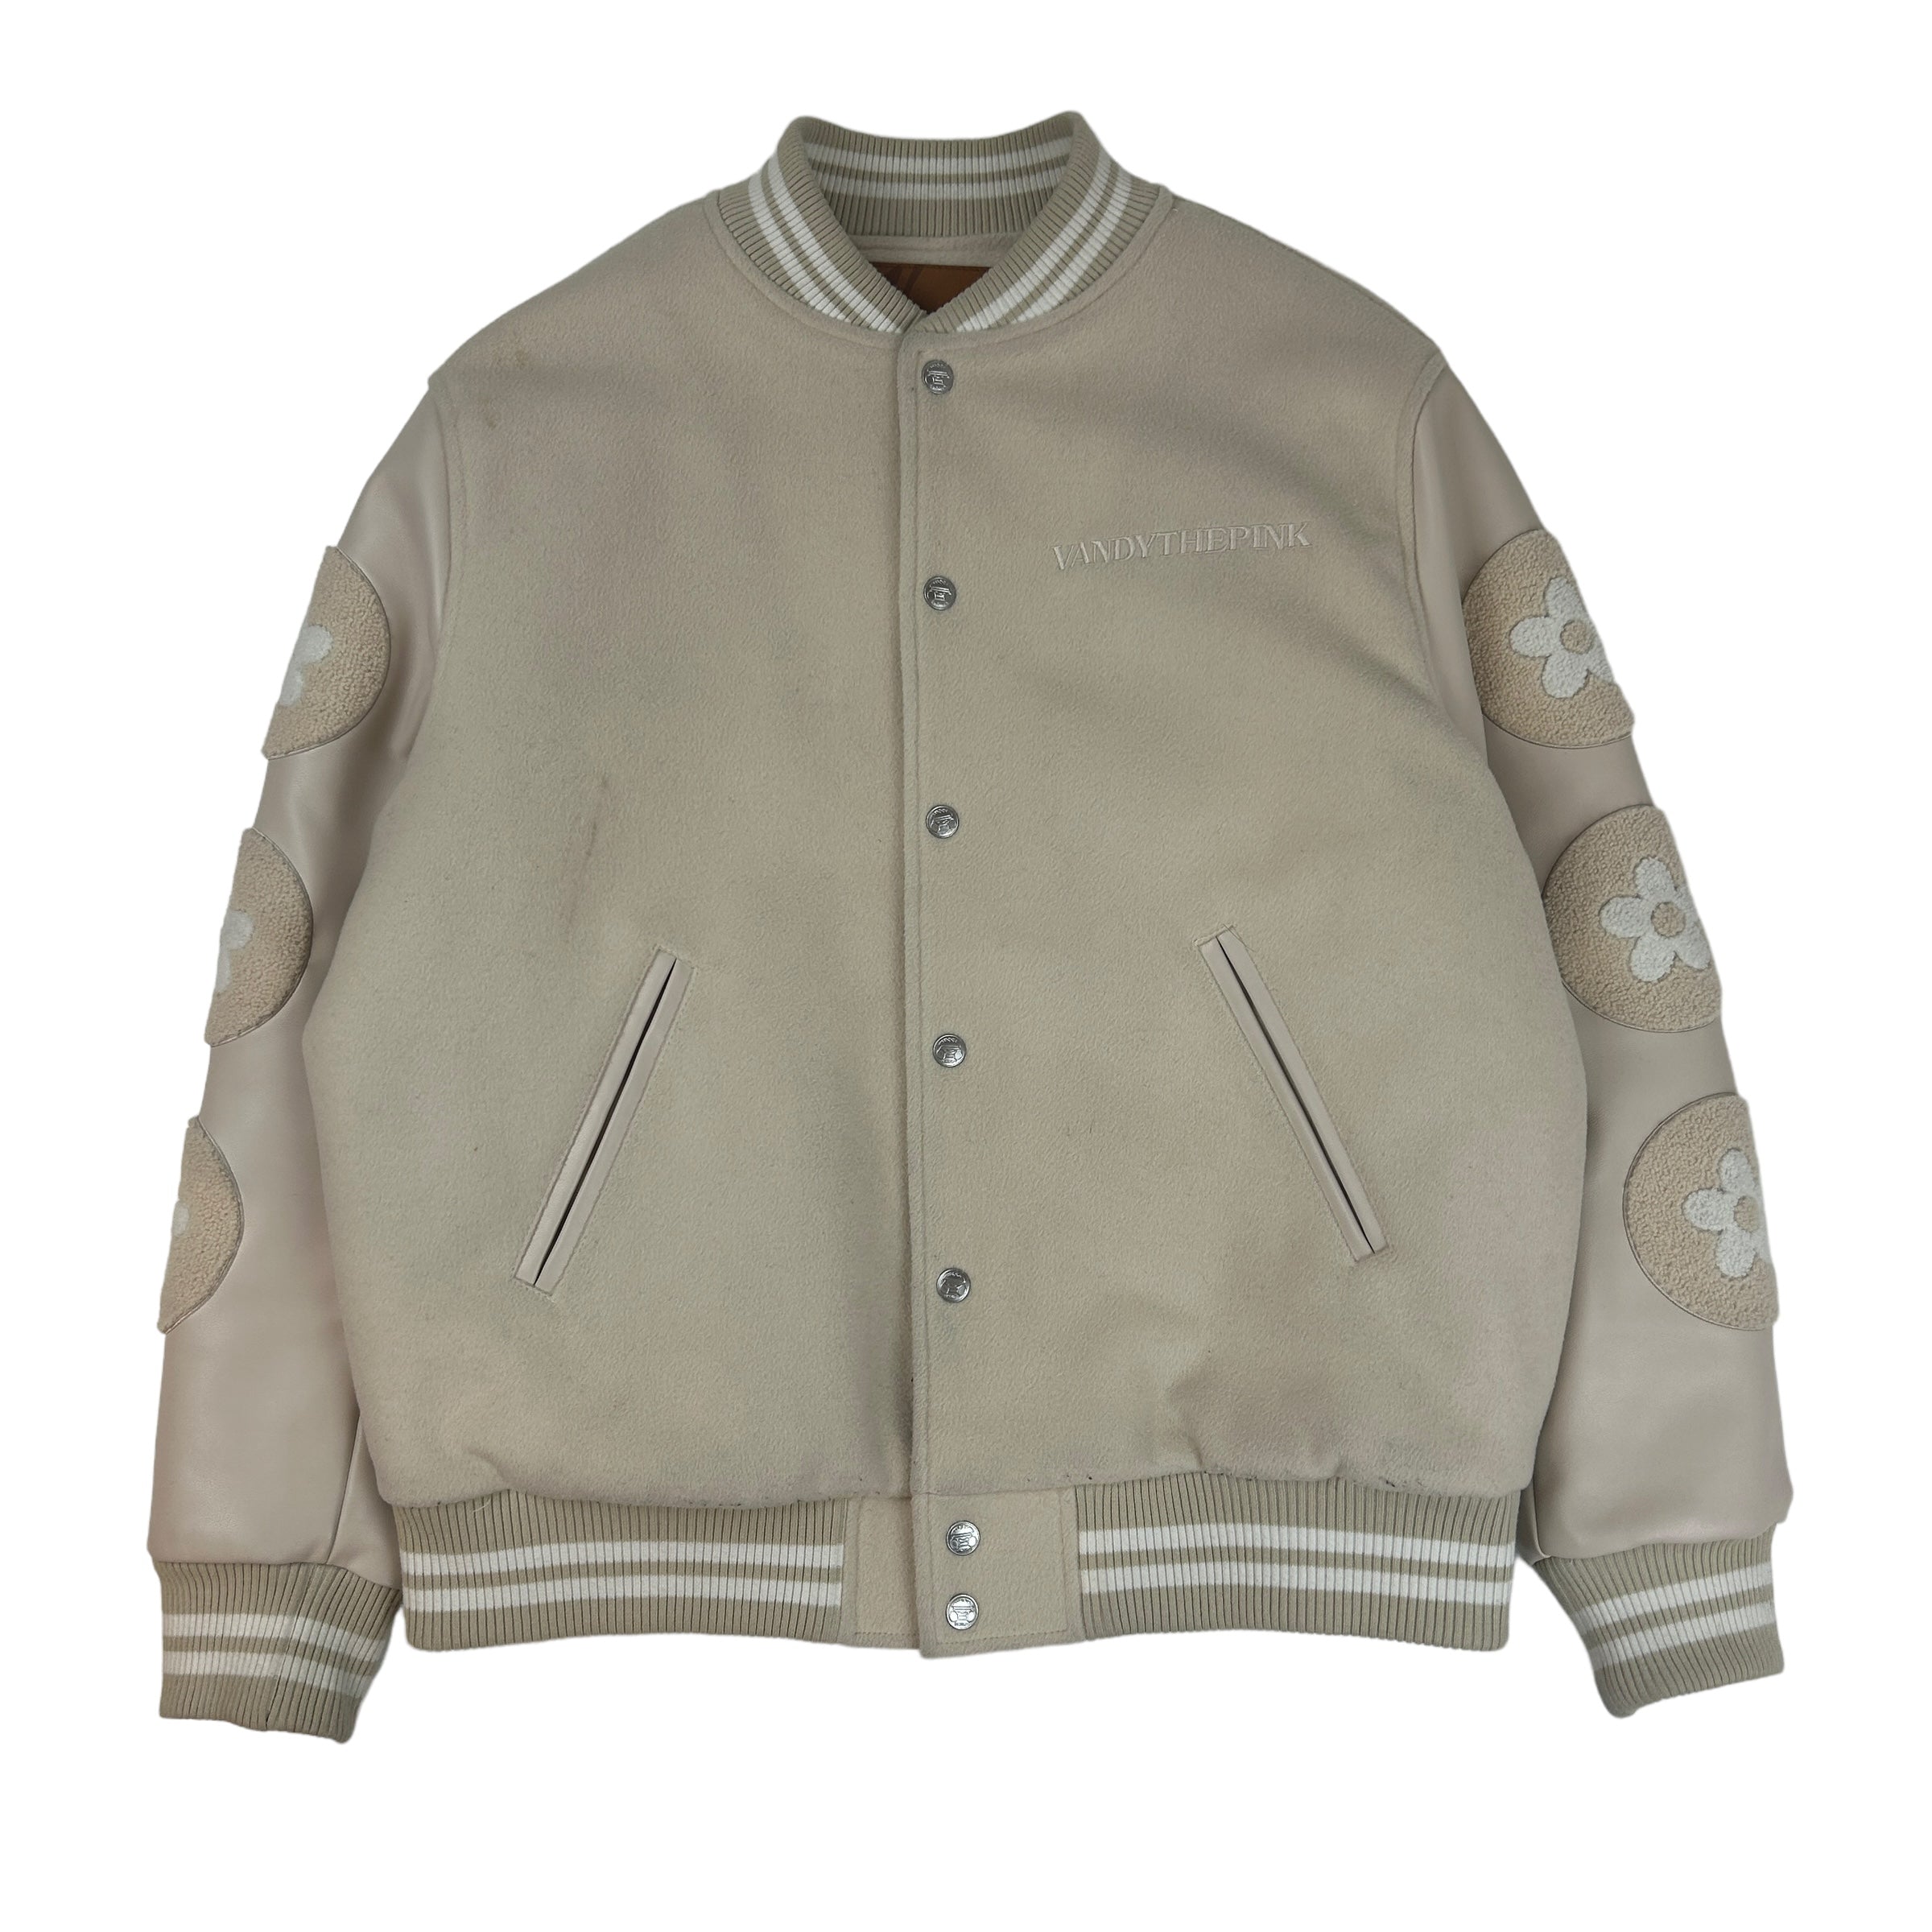 Vandy The Pink Lost and Found Cream Varsity Jacket